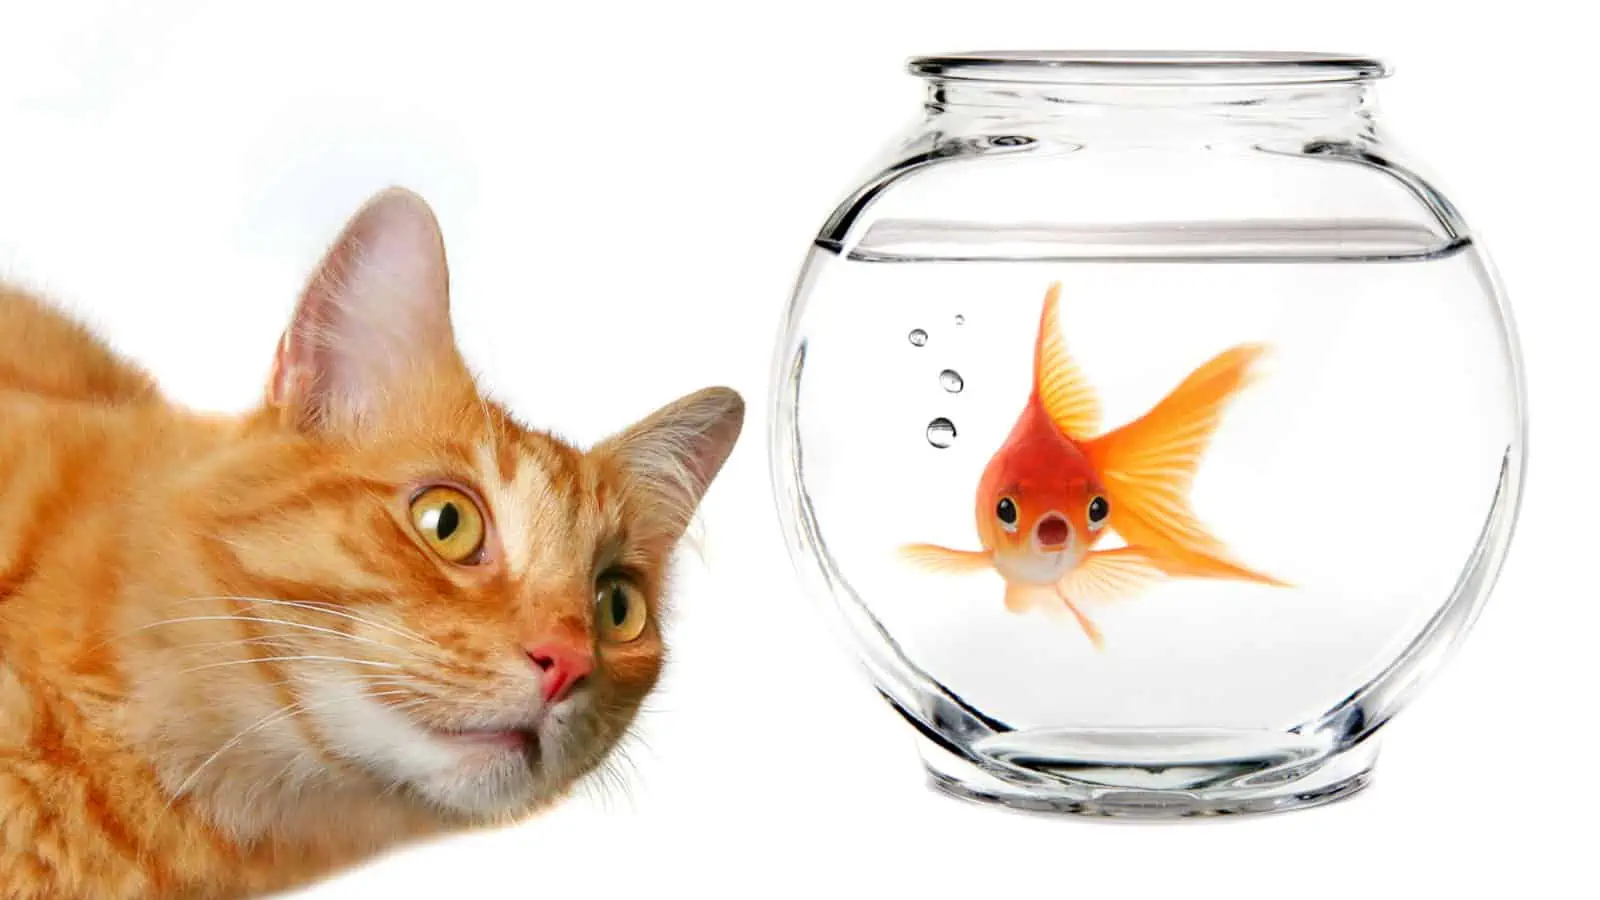 cat and goldfish in bowl Shutterstock